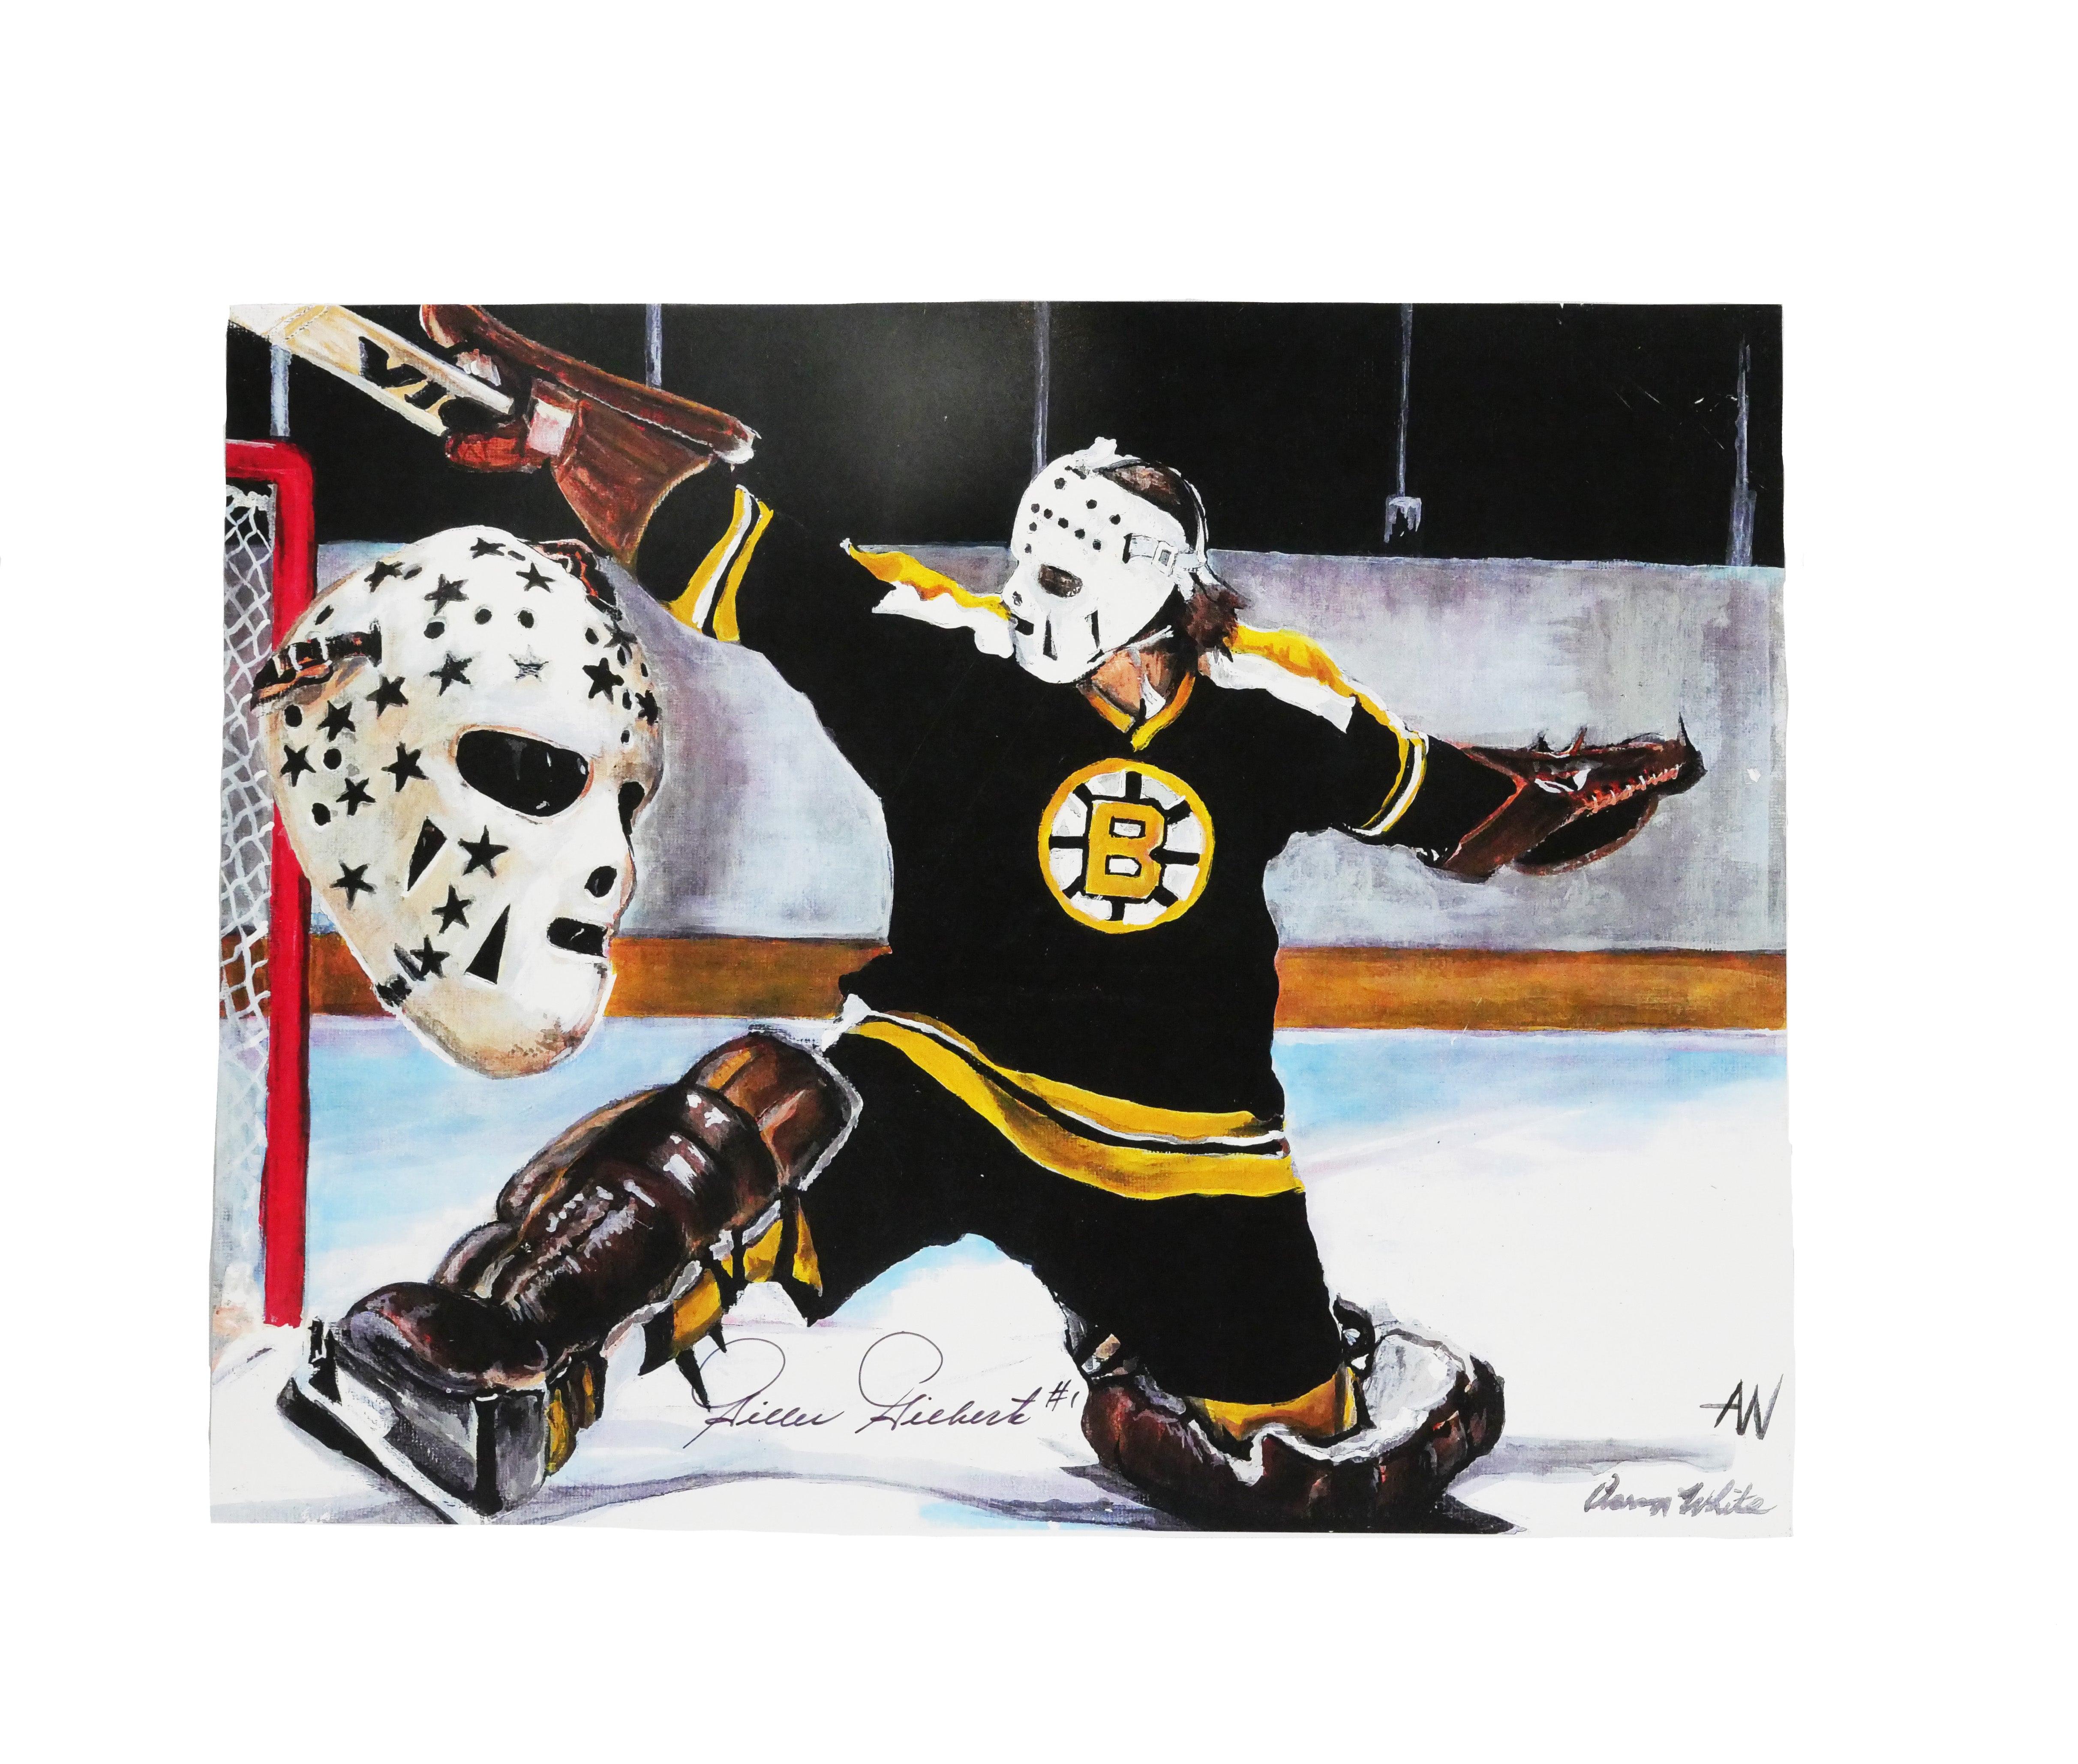 Gilles Gilbert Boston Bruins 16x12 Dive with Mask Art Piece Signed